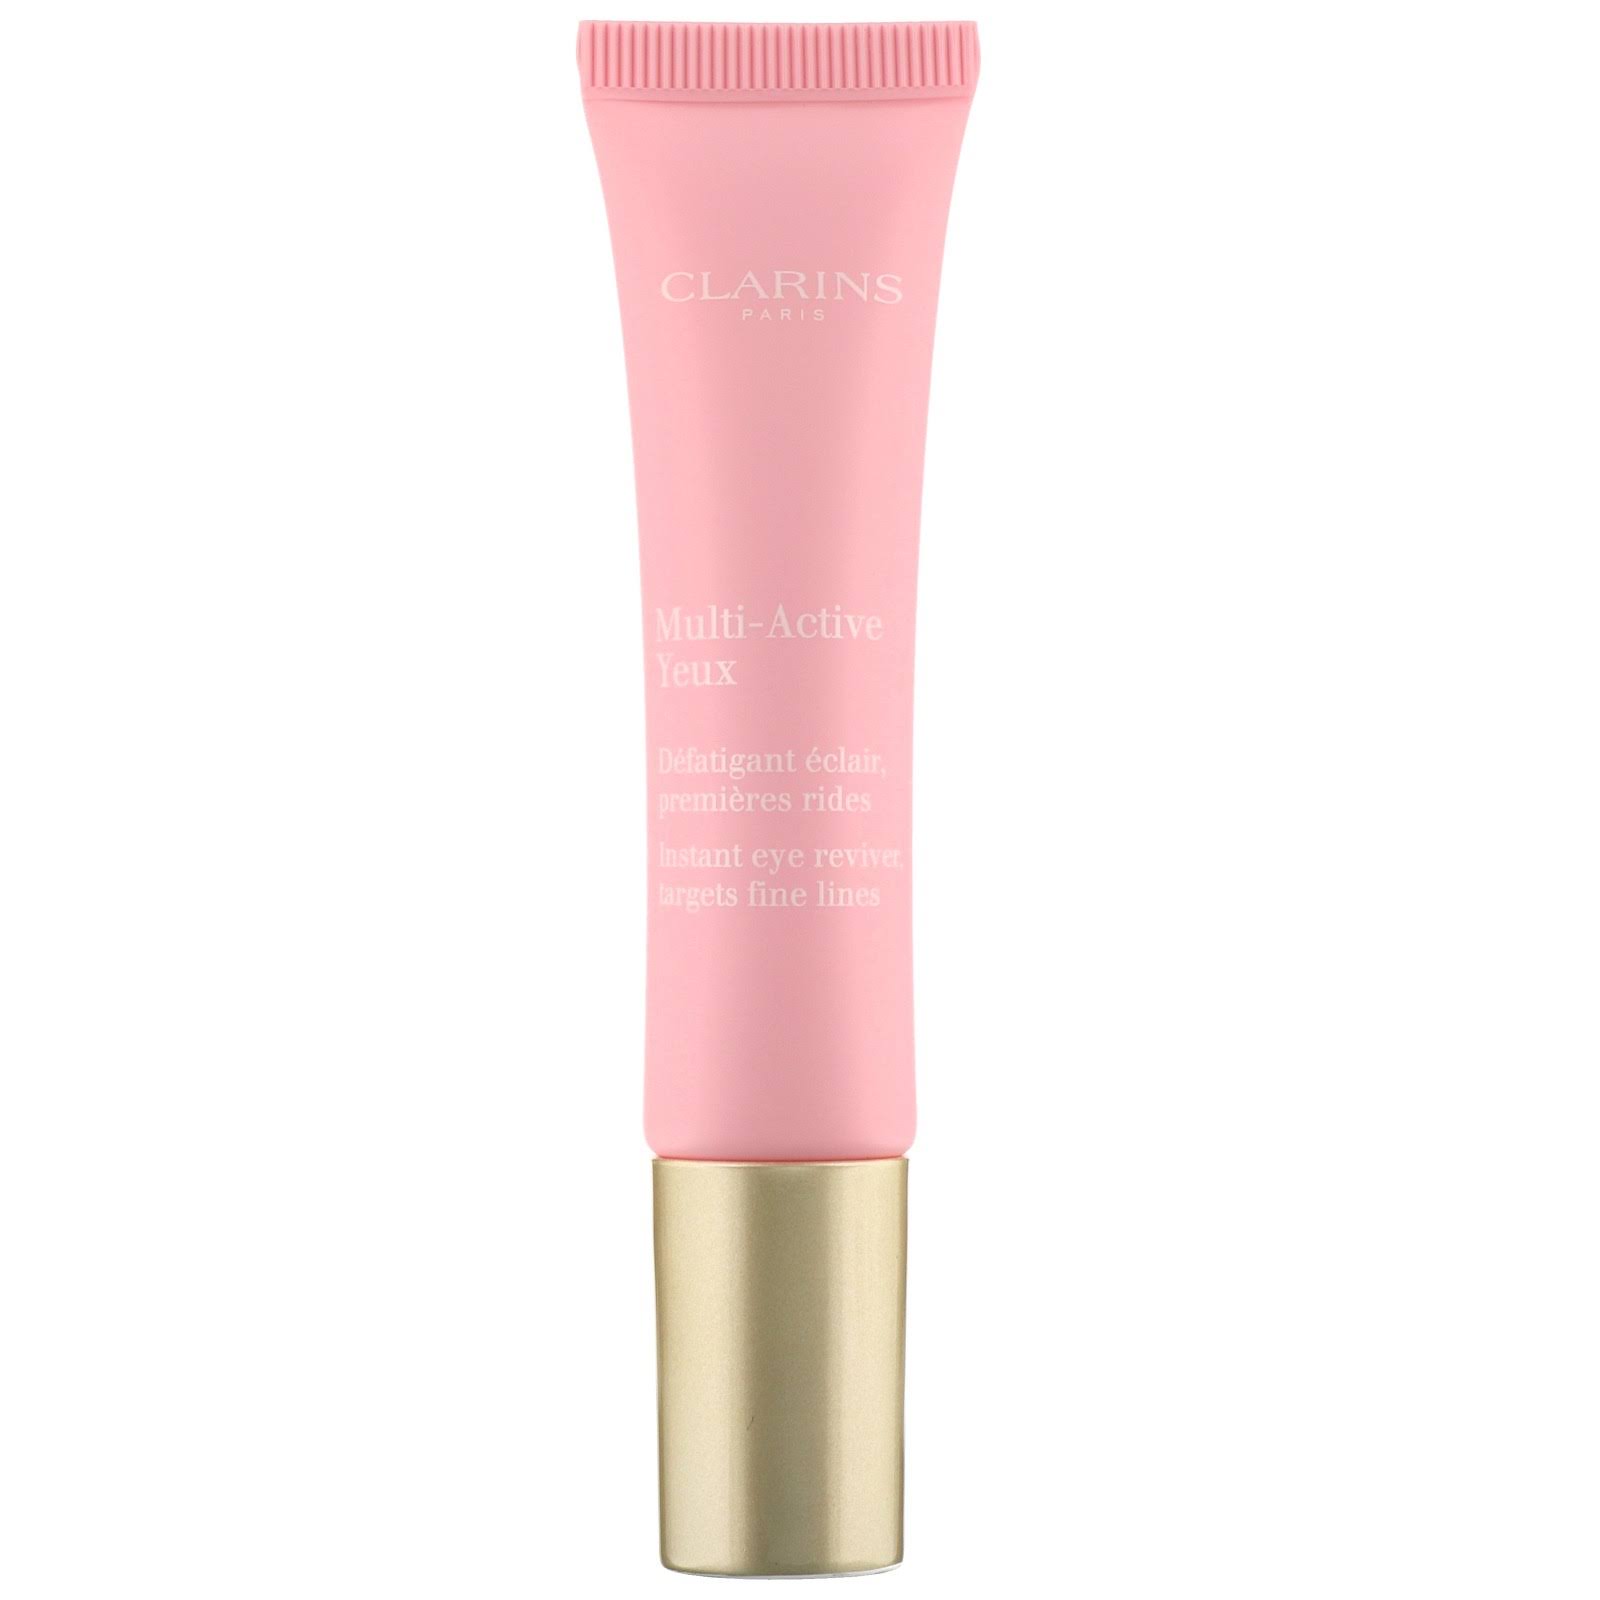 Clarins Multi Active Yeux 15 ml